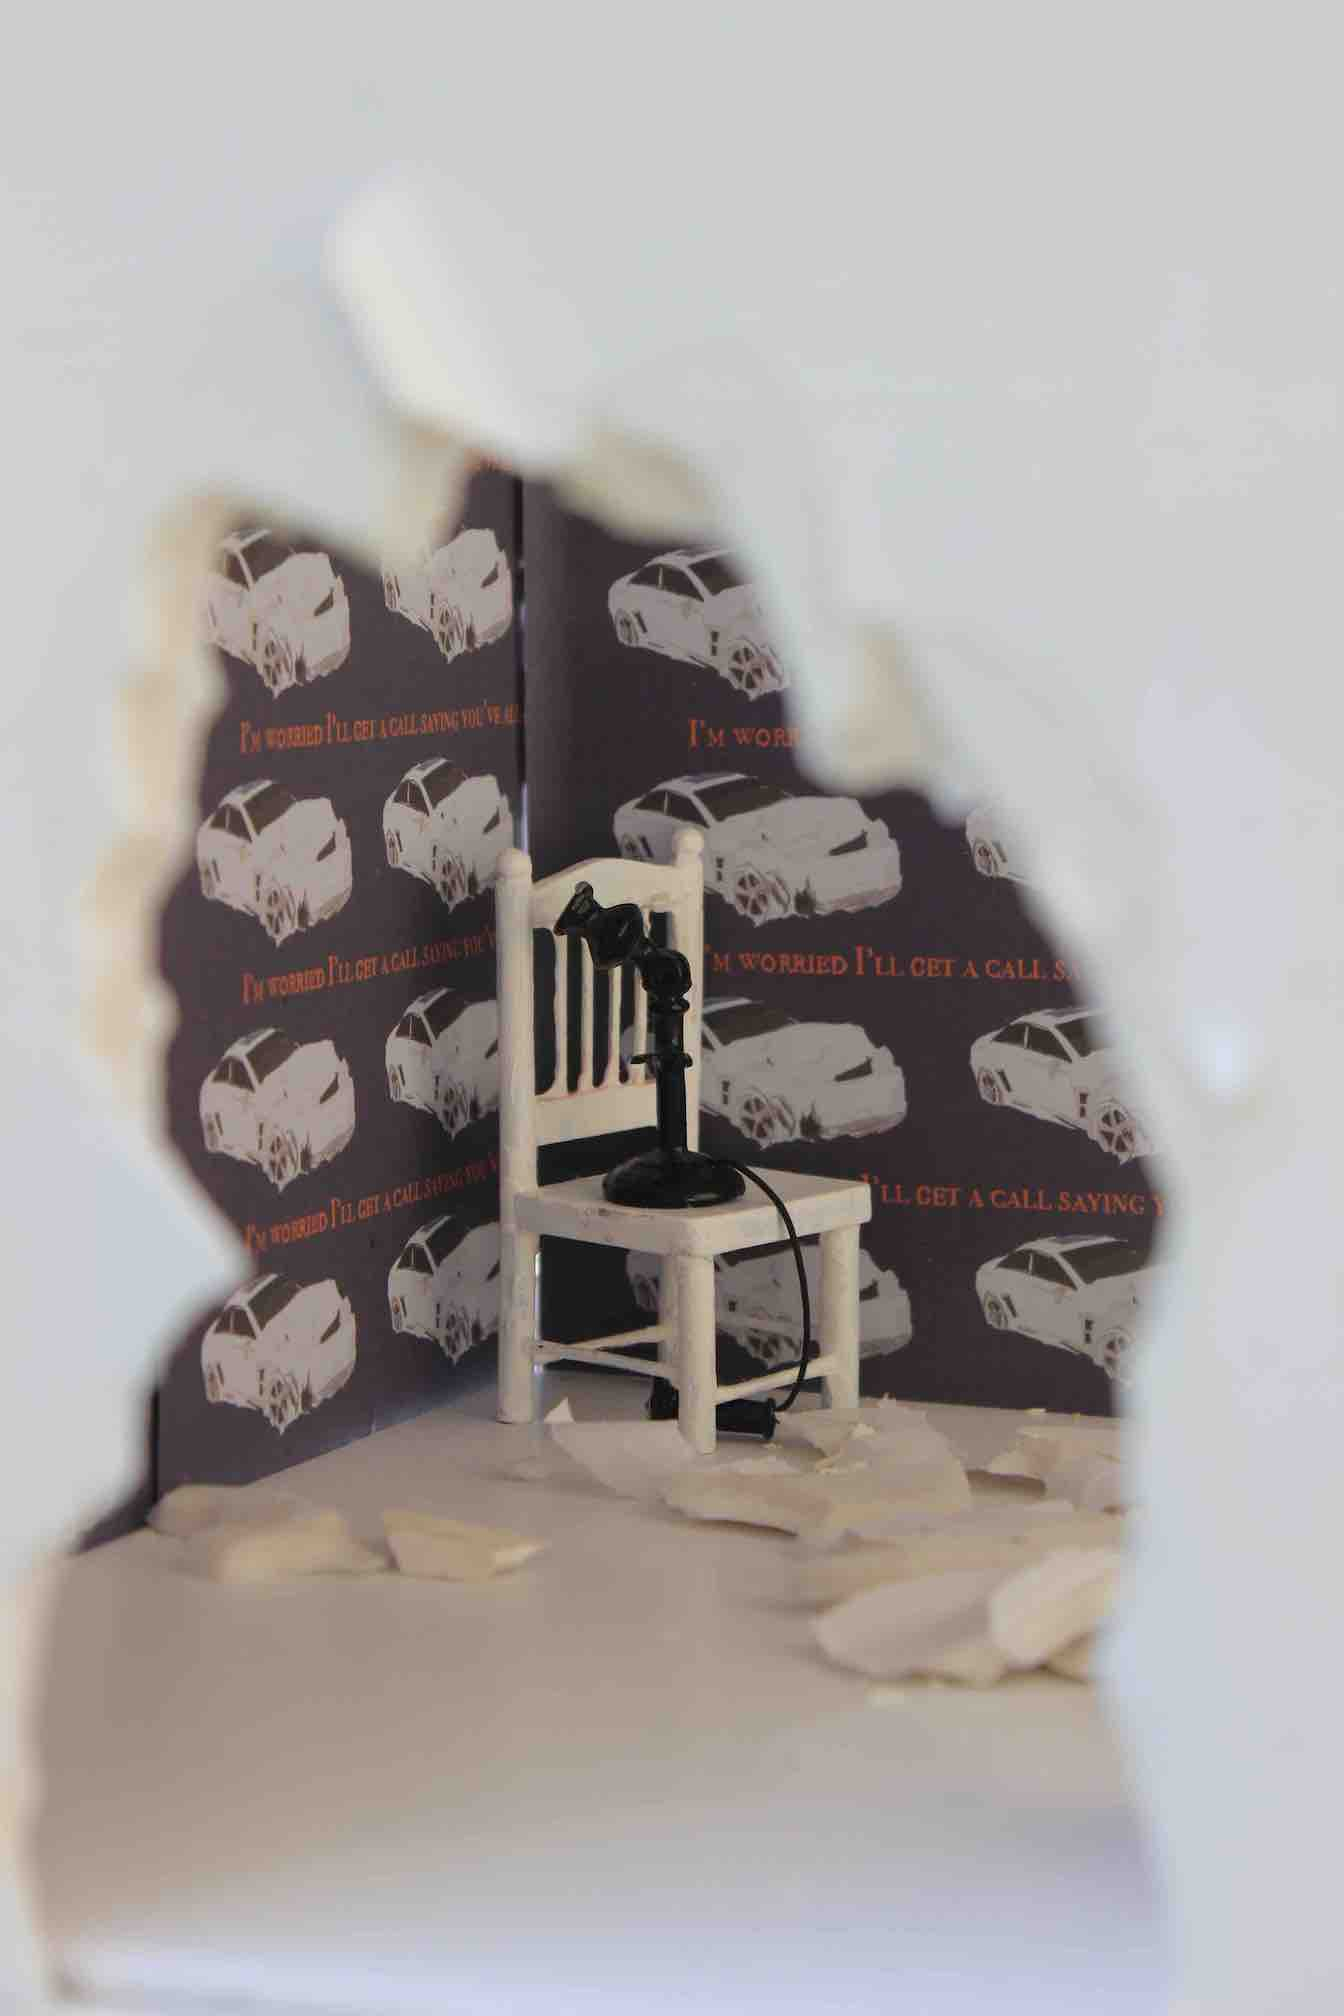 A miniature room with a hole in the wall showing a chair and a telephone